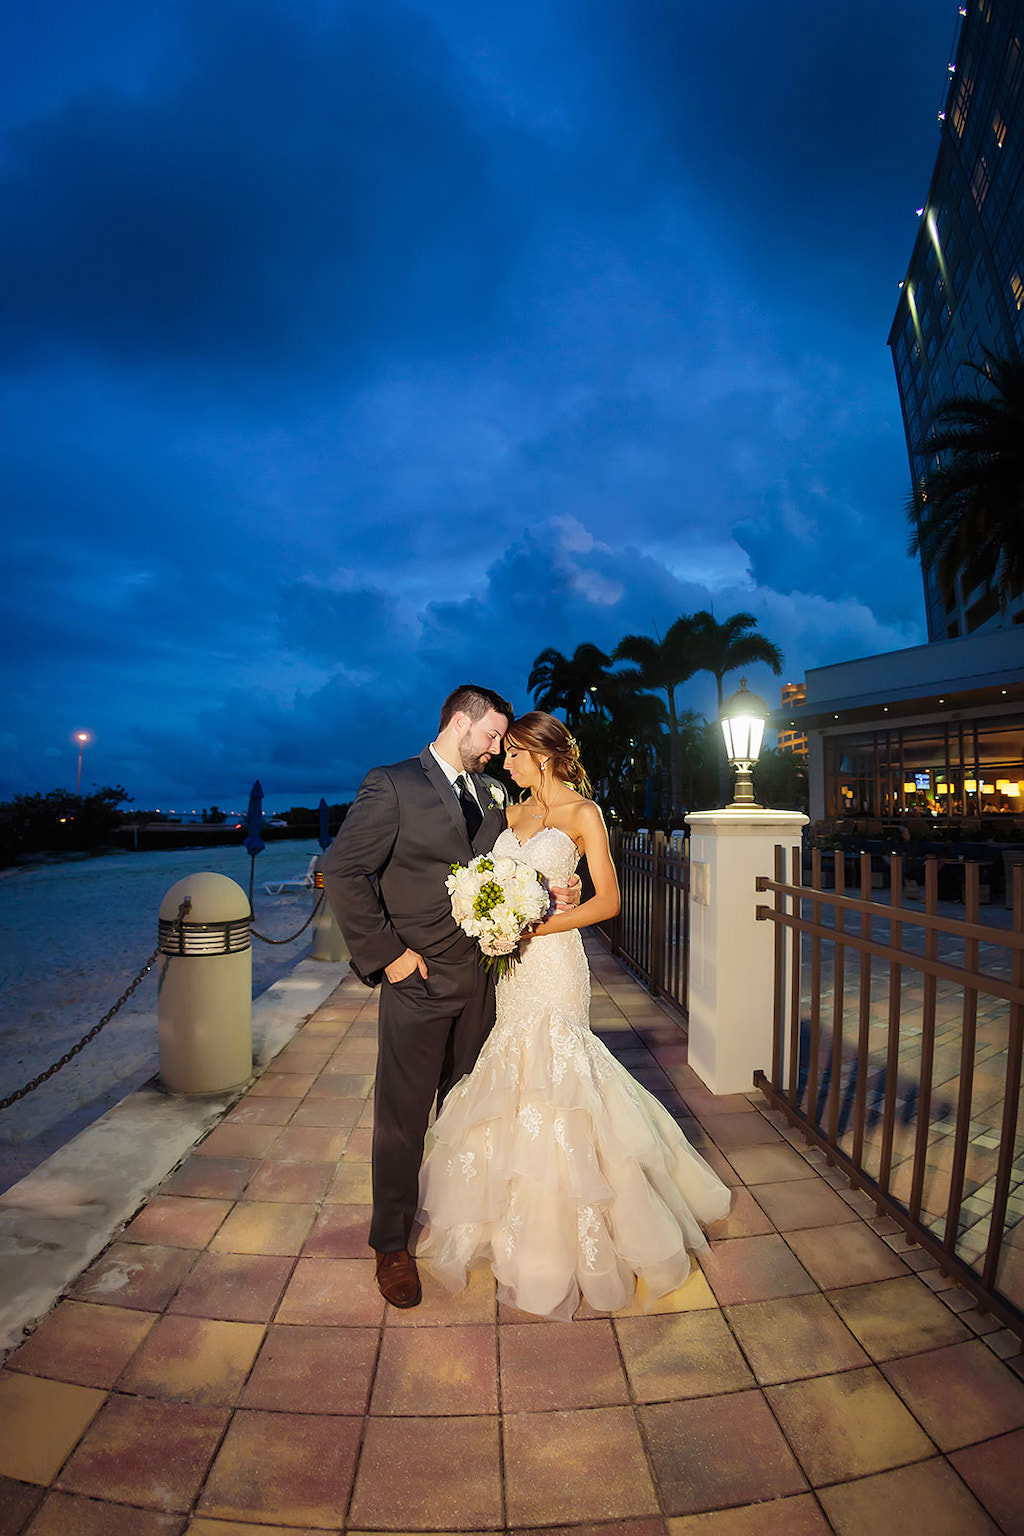 Nighttime Florida Outdoor Bride and Groom Wedding Portrait on Boardwalk | Tampa Bay Wedding Venue The Westin Tampa Bay | Destiny & Light Hair and Makeup Group